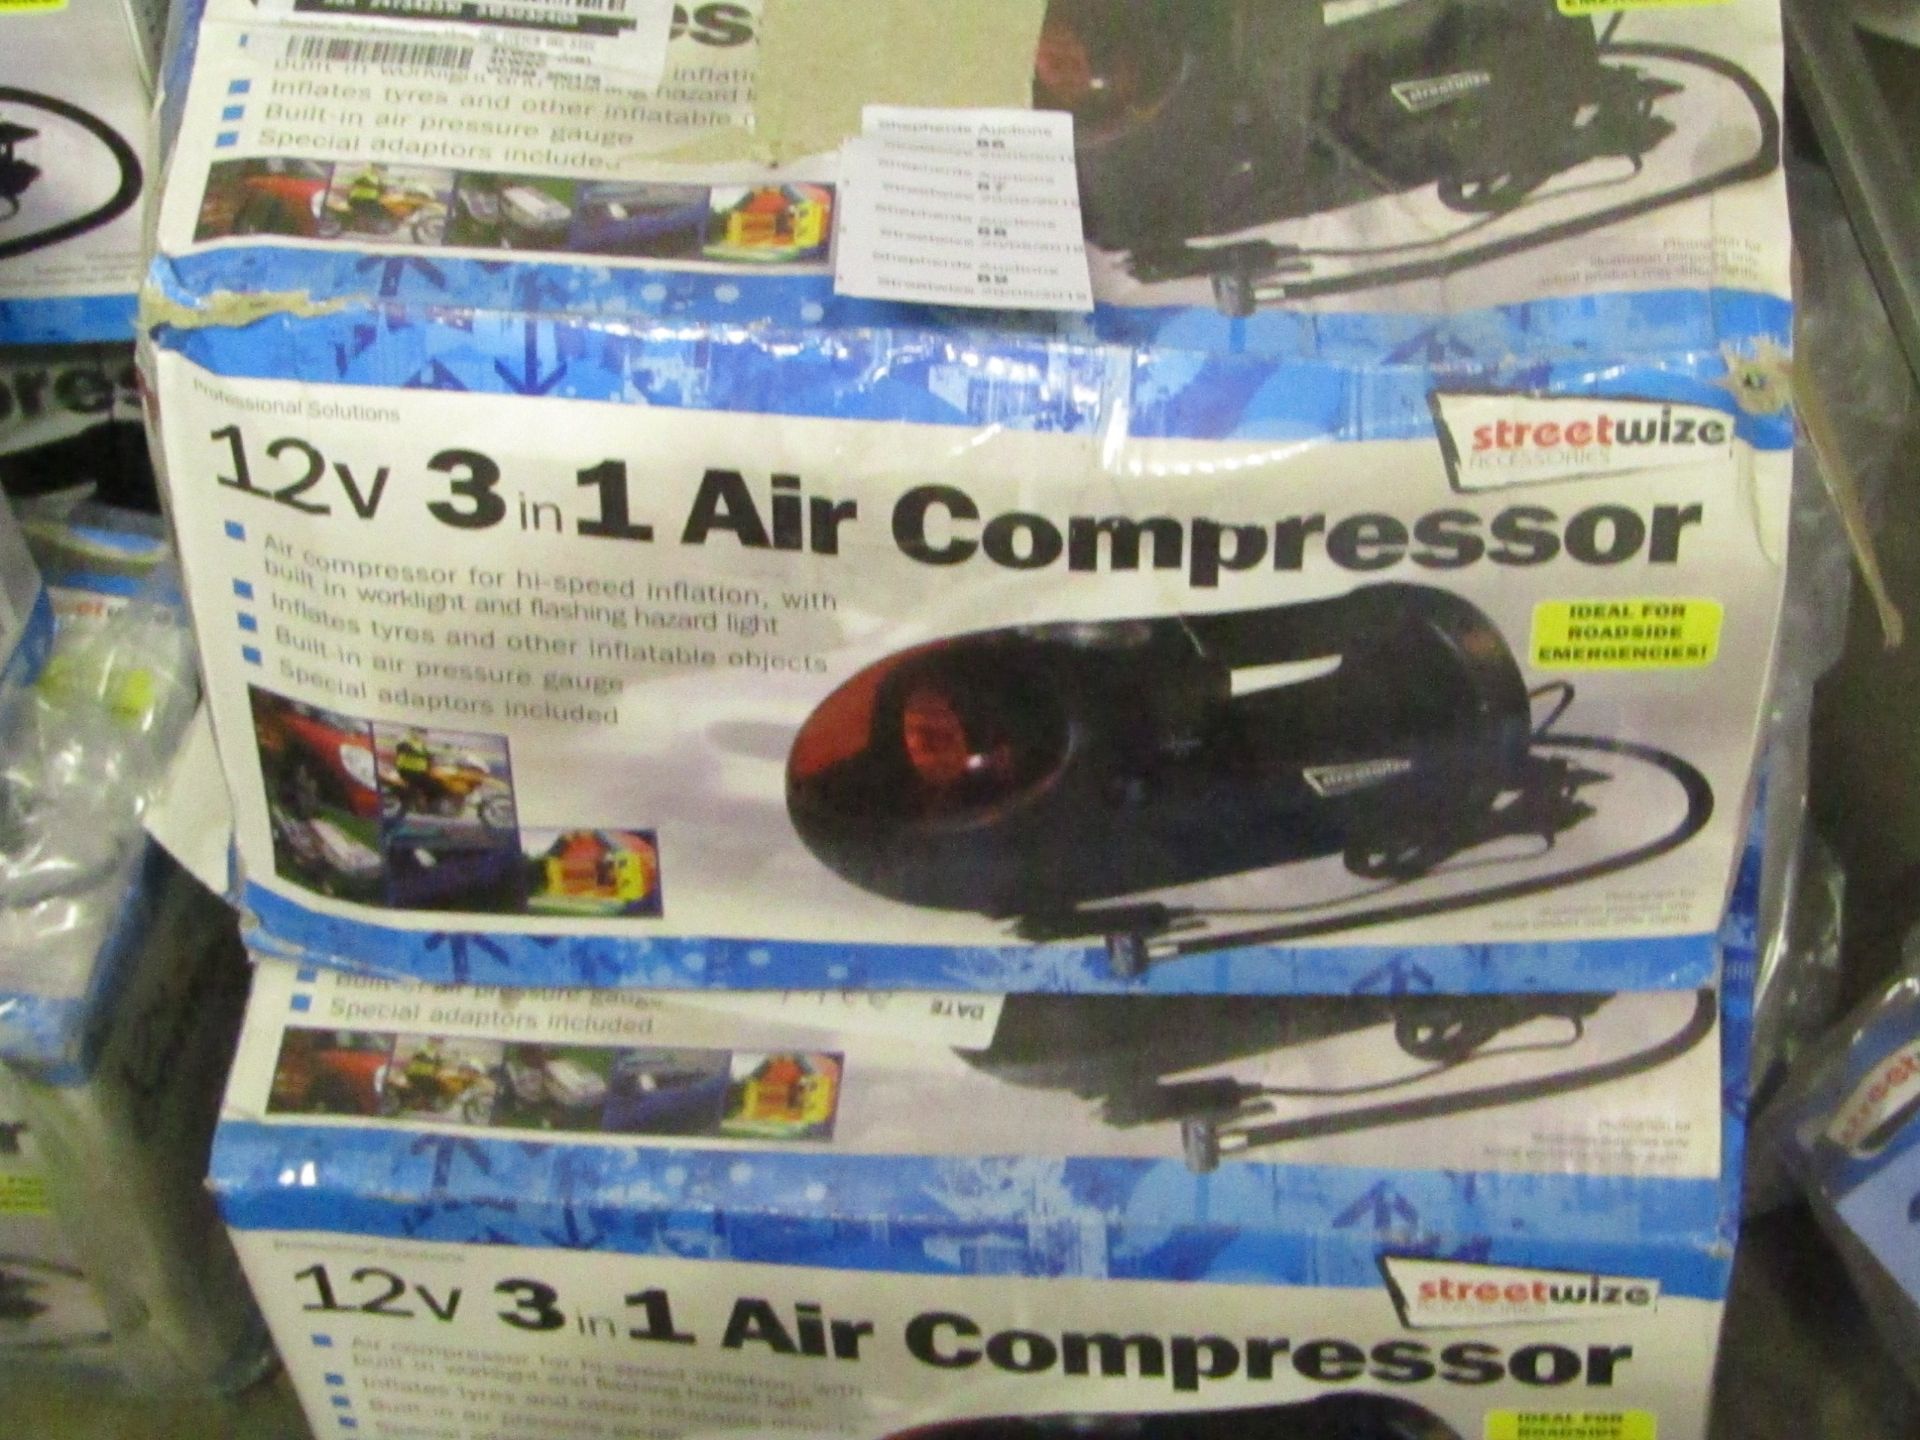 Streetwize 12v 3 in 1 air compressor, unchecked and boxed.